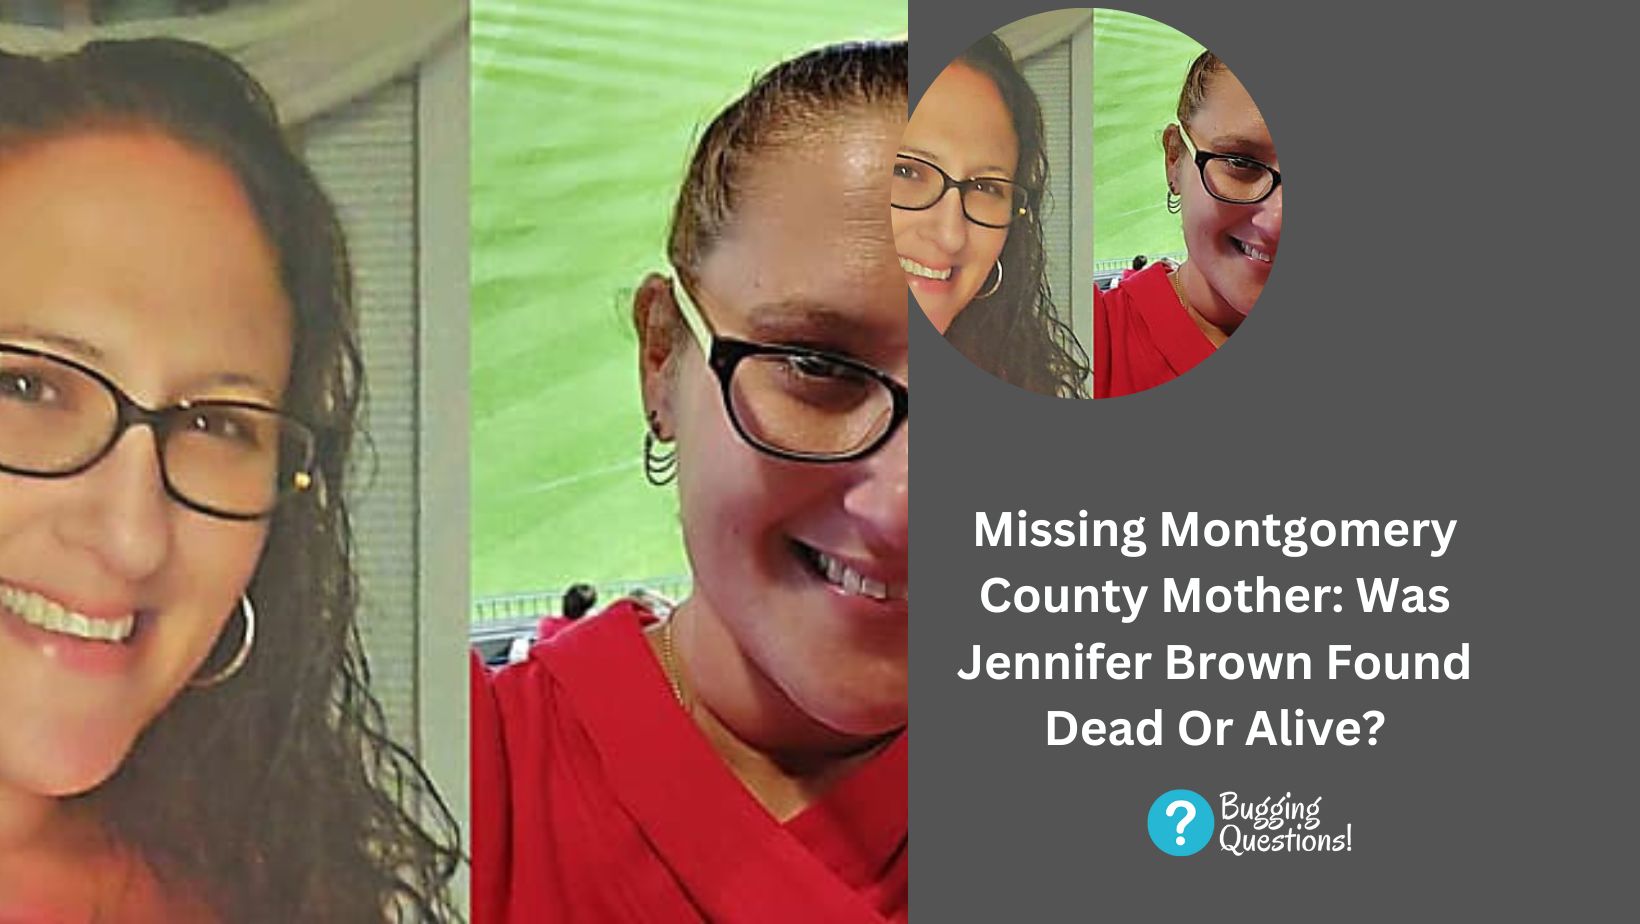 Missing Montgomery County Mother: Was Jennifer Brown Found Dead Or Alive?